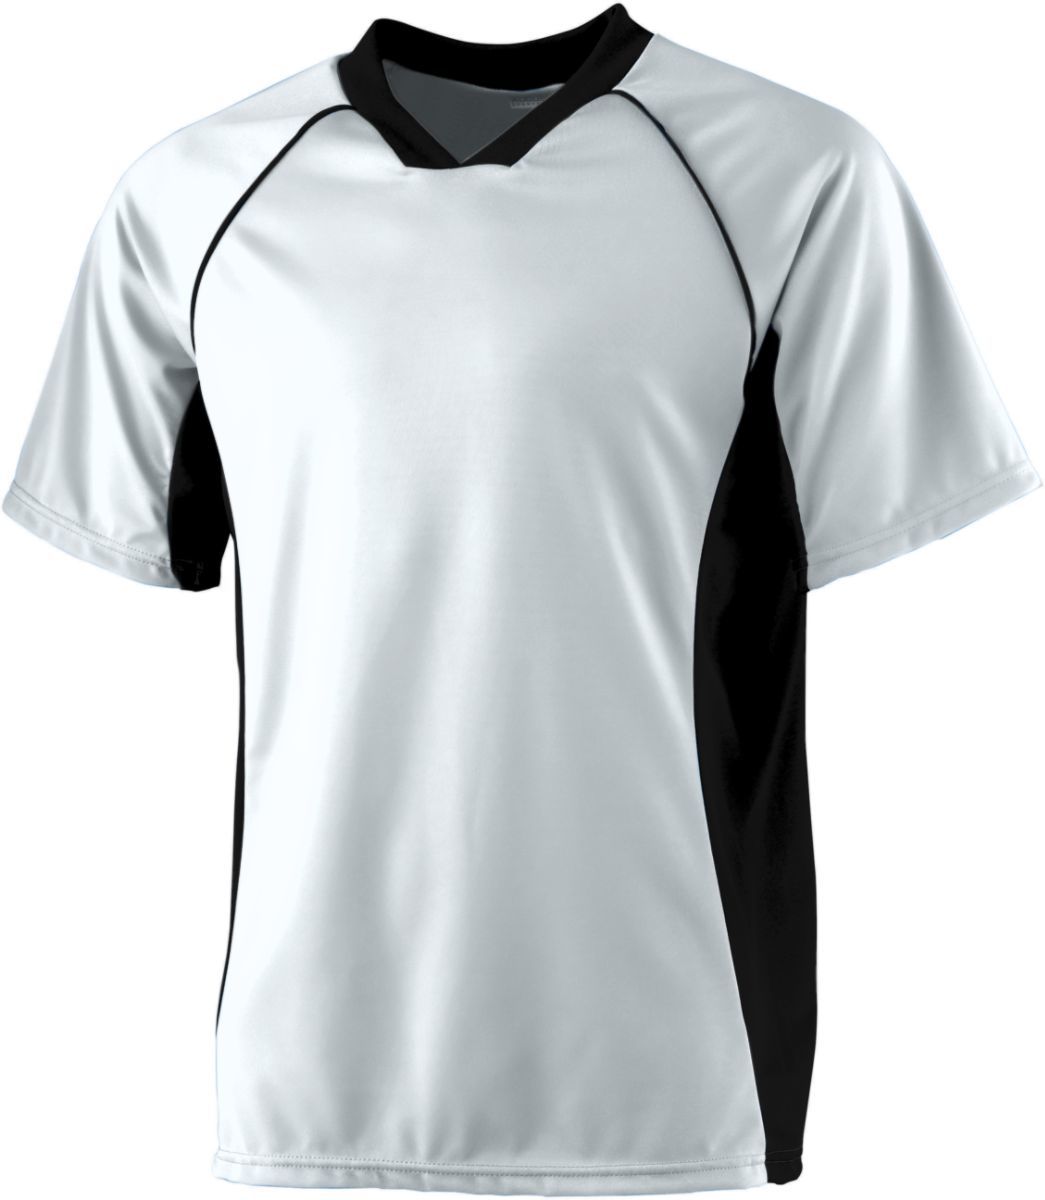 Augusta Sportswear Youth Wicking Soccer Jersey in Silver/Black  -Part of the Youth, Youth-Jersey, Augusta-Products, Soccer, Shirts, All-Sports-1 product lines at KanaleyCreations.com